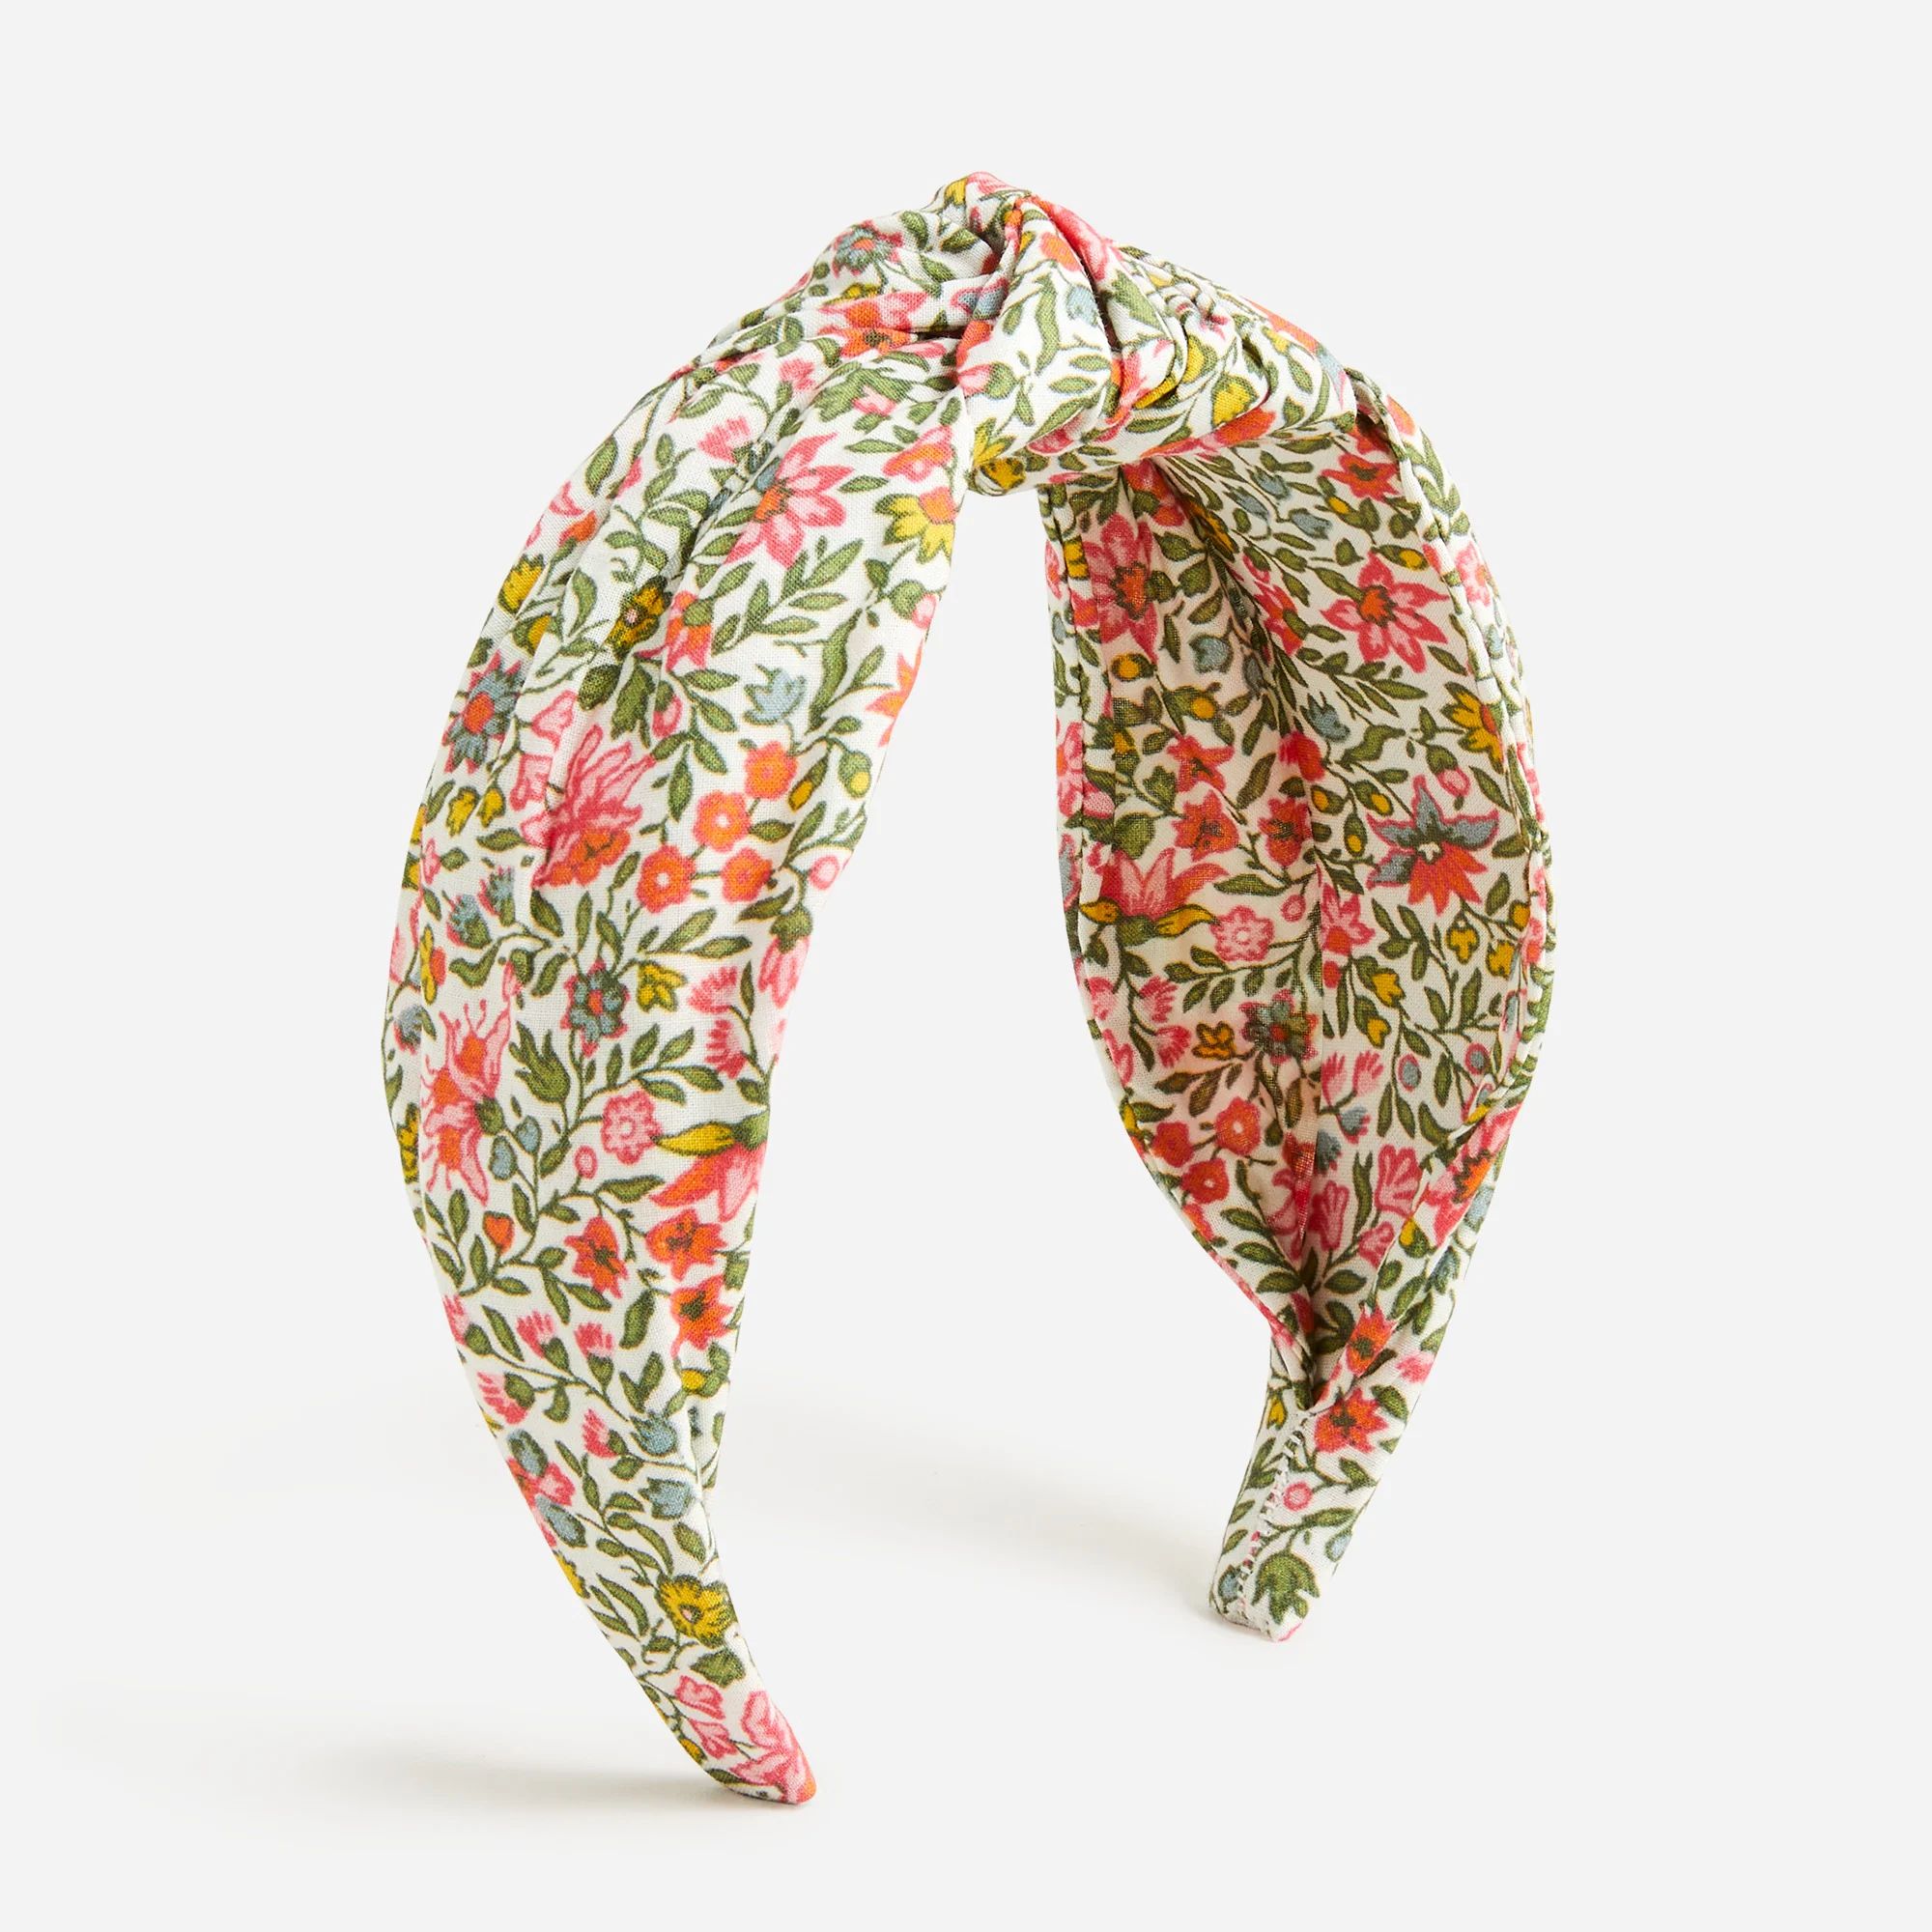 Knot headband in floral meadow | J.Crew US